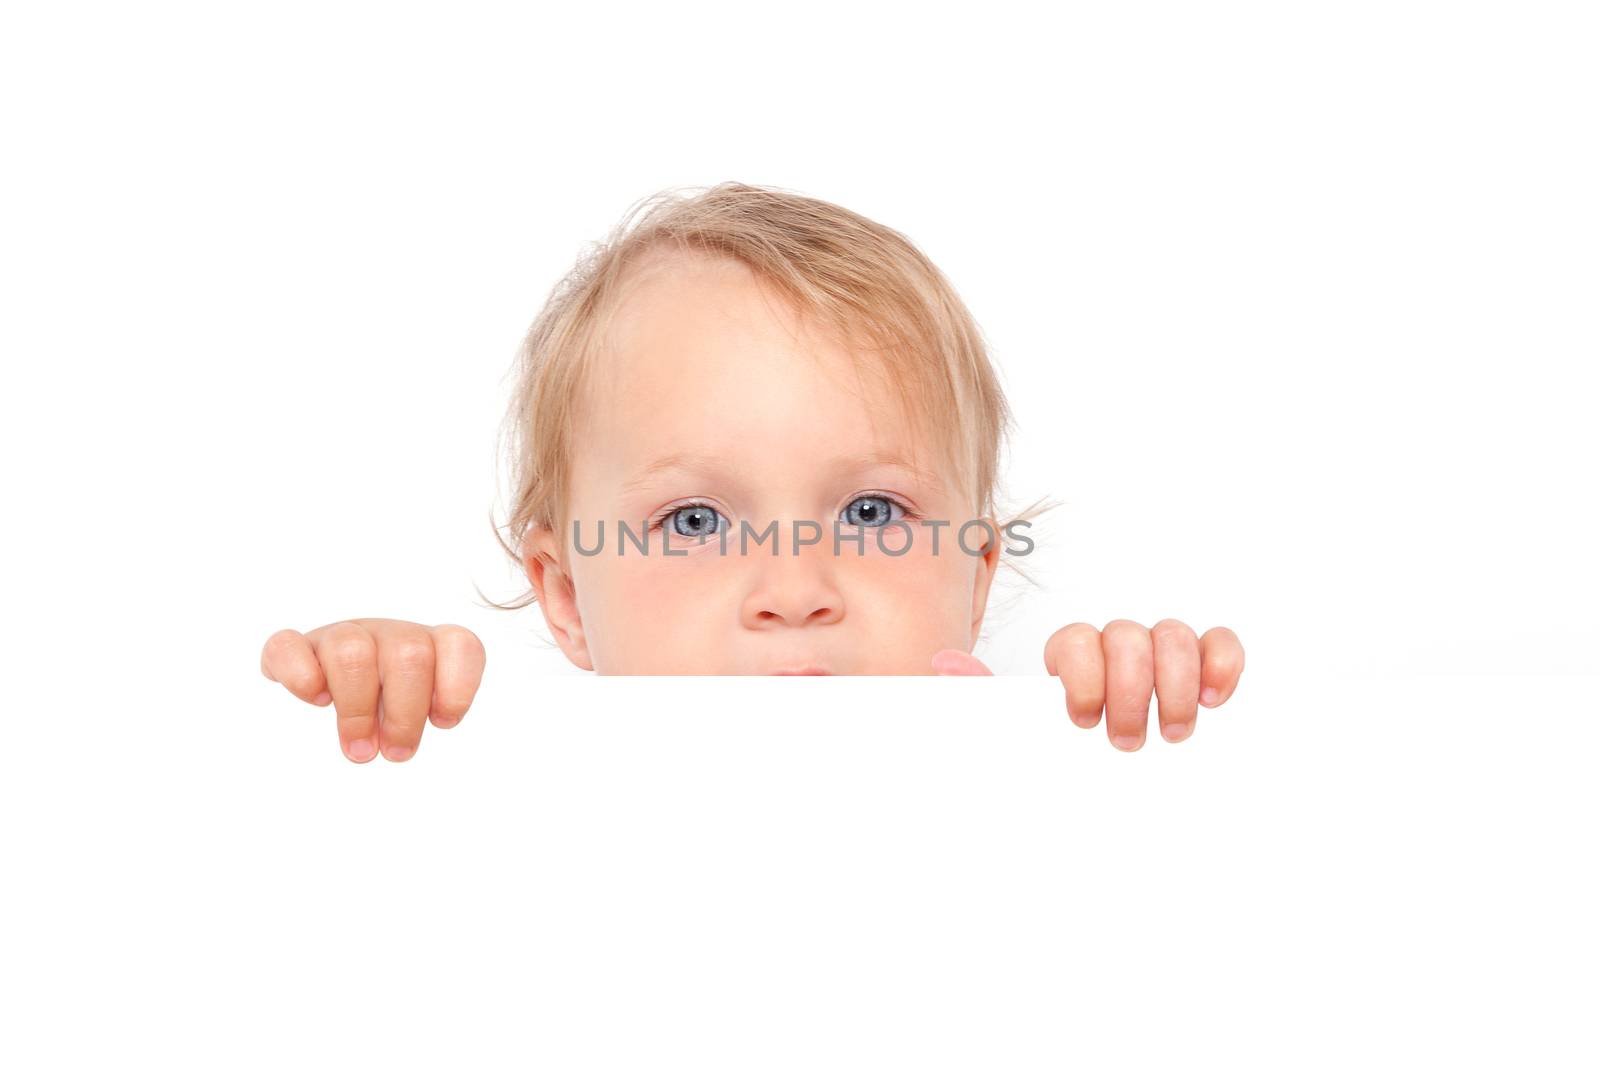 Cute blonde baby girl with big blue eyes looking over white board isolated on white background. Cute curious baby and family concept.